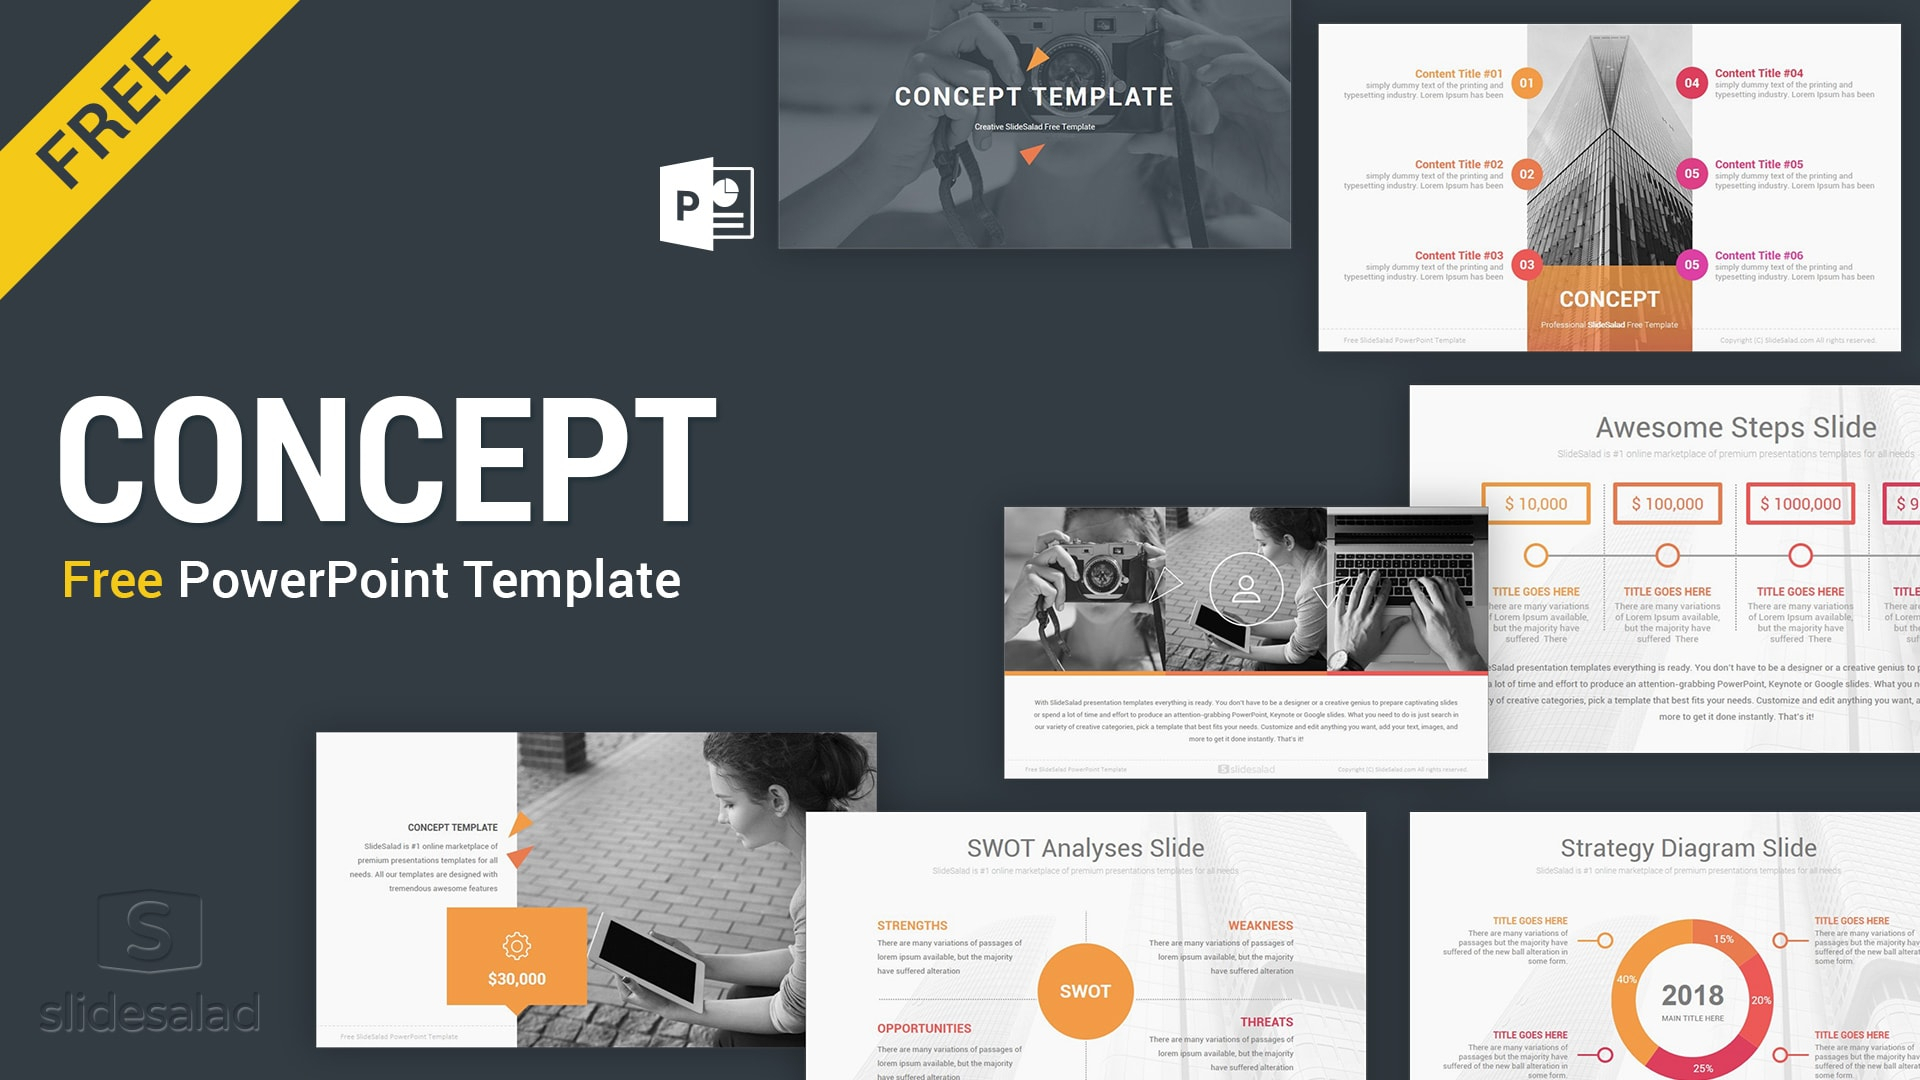 Presentation Templates For Powerpoint Free Download Business For Powerpoint Slides Design Templates For Free